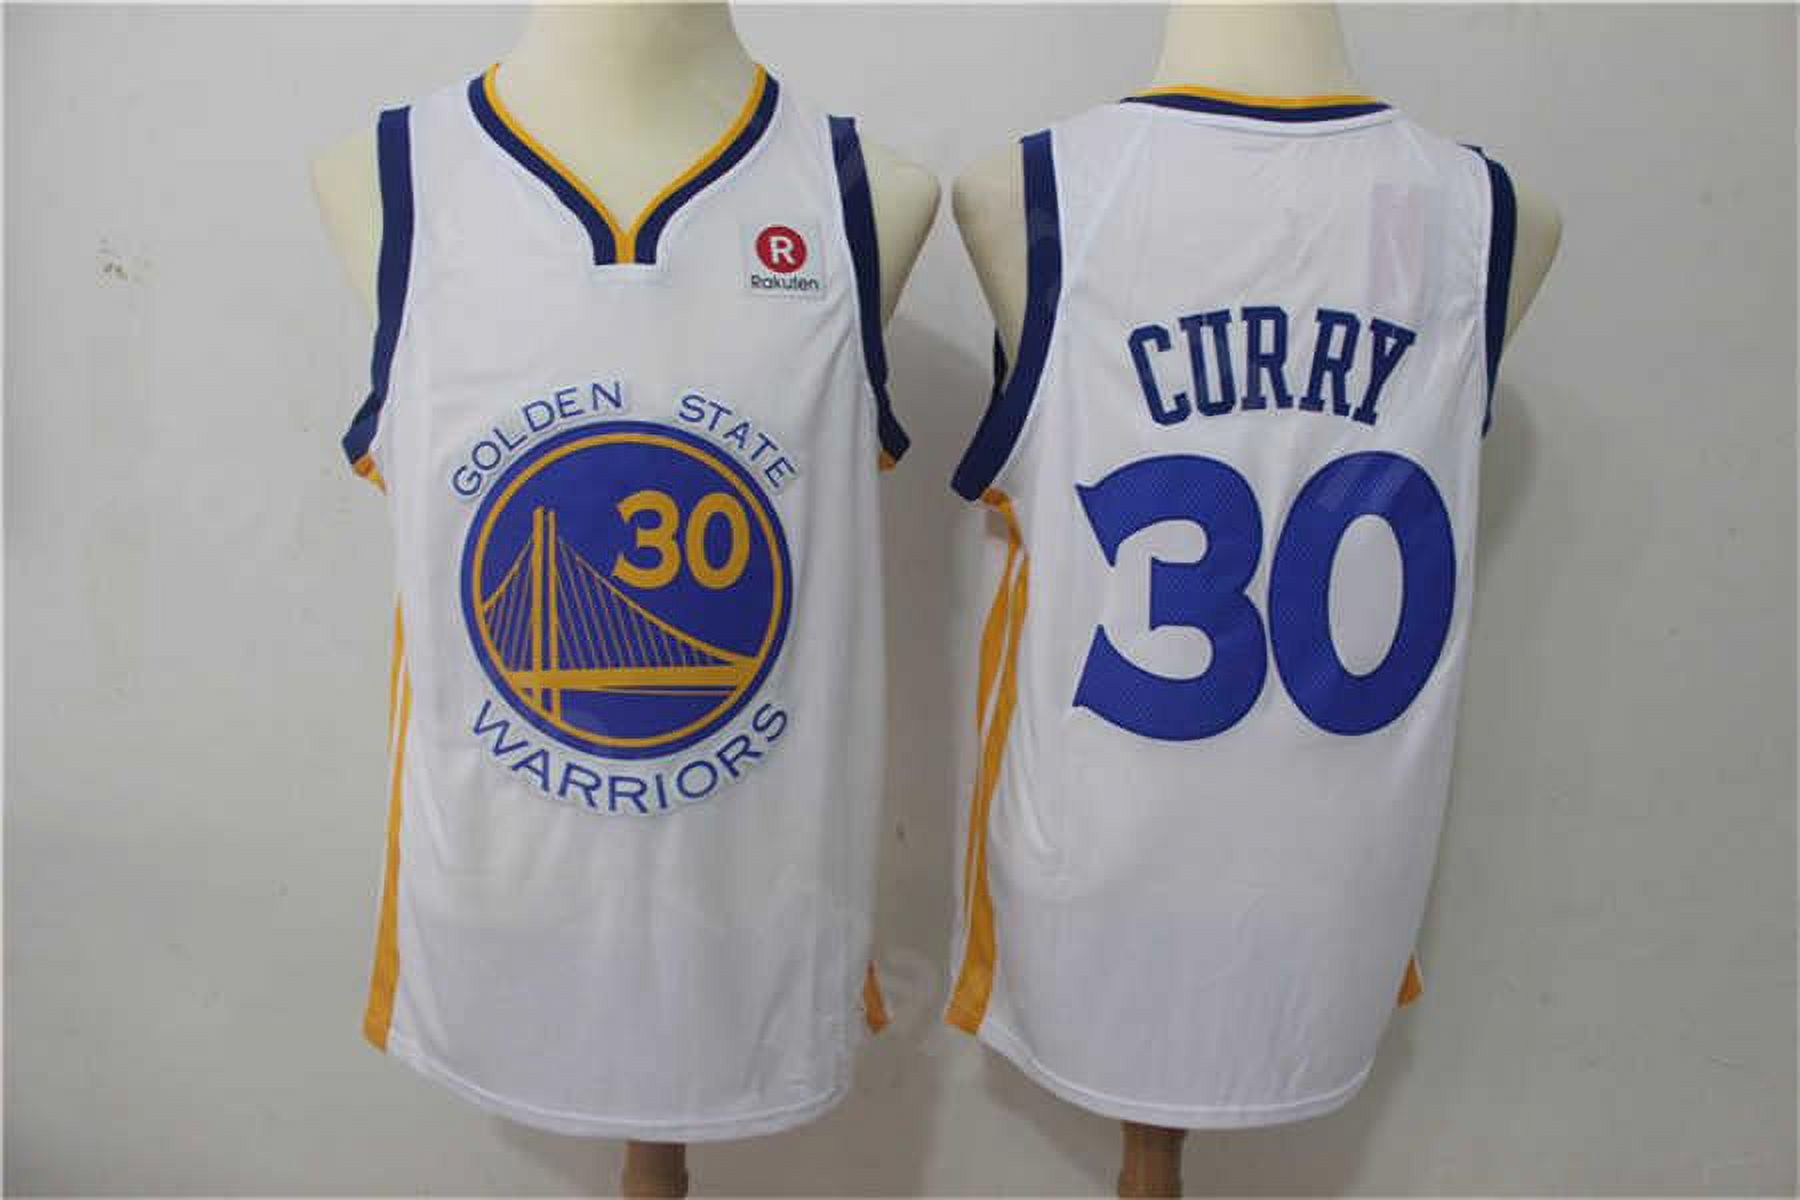 Basketball Jersey Men Oversize 30 Stephen Curry DAVIDSON College Embroidery  Breathable Athletic Sports Street Hip Hop Sportswear